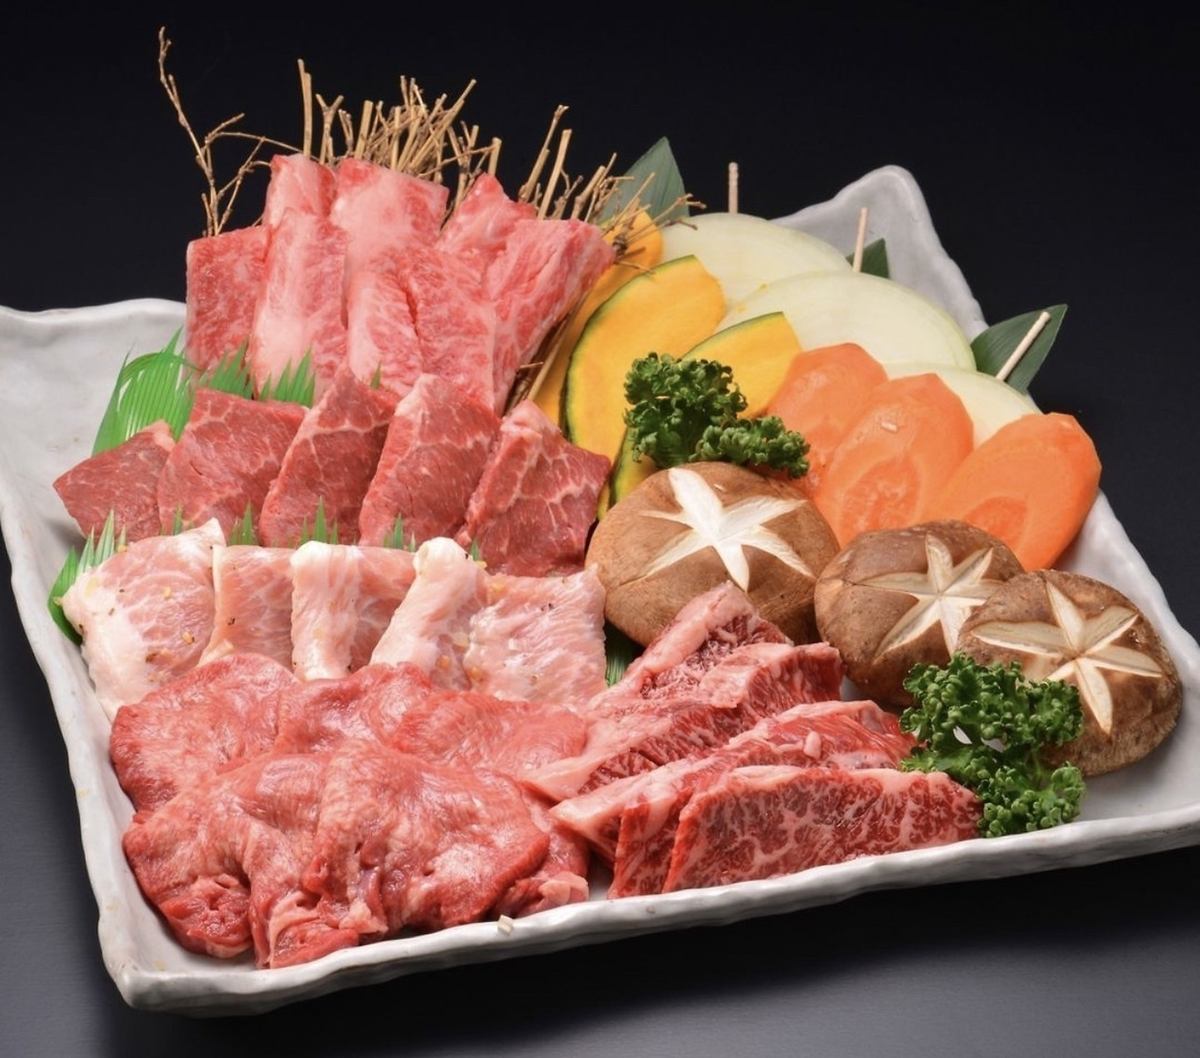 We offer a variety of exquisite meats such as premium Wagyu short ribs and beef tongue!